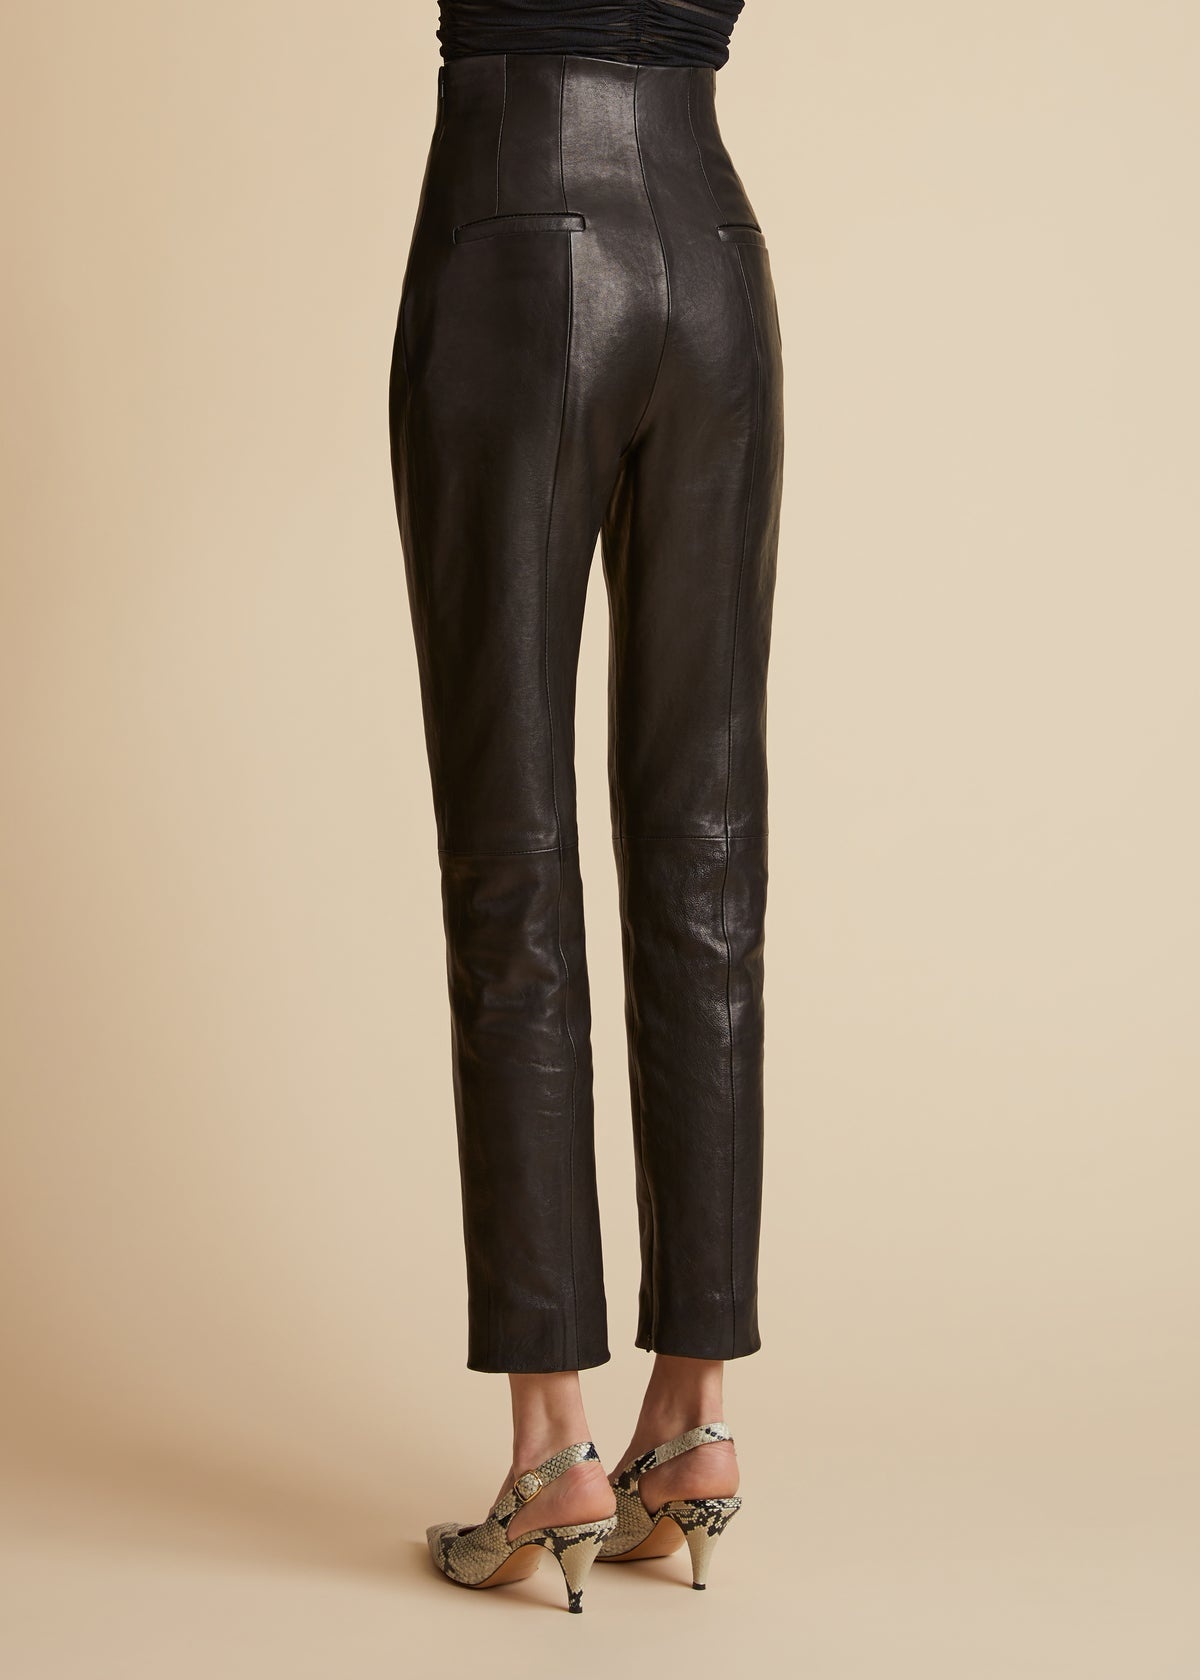 The Lenn Pant in Black Leather - 2